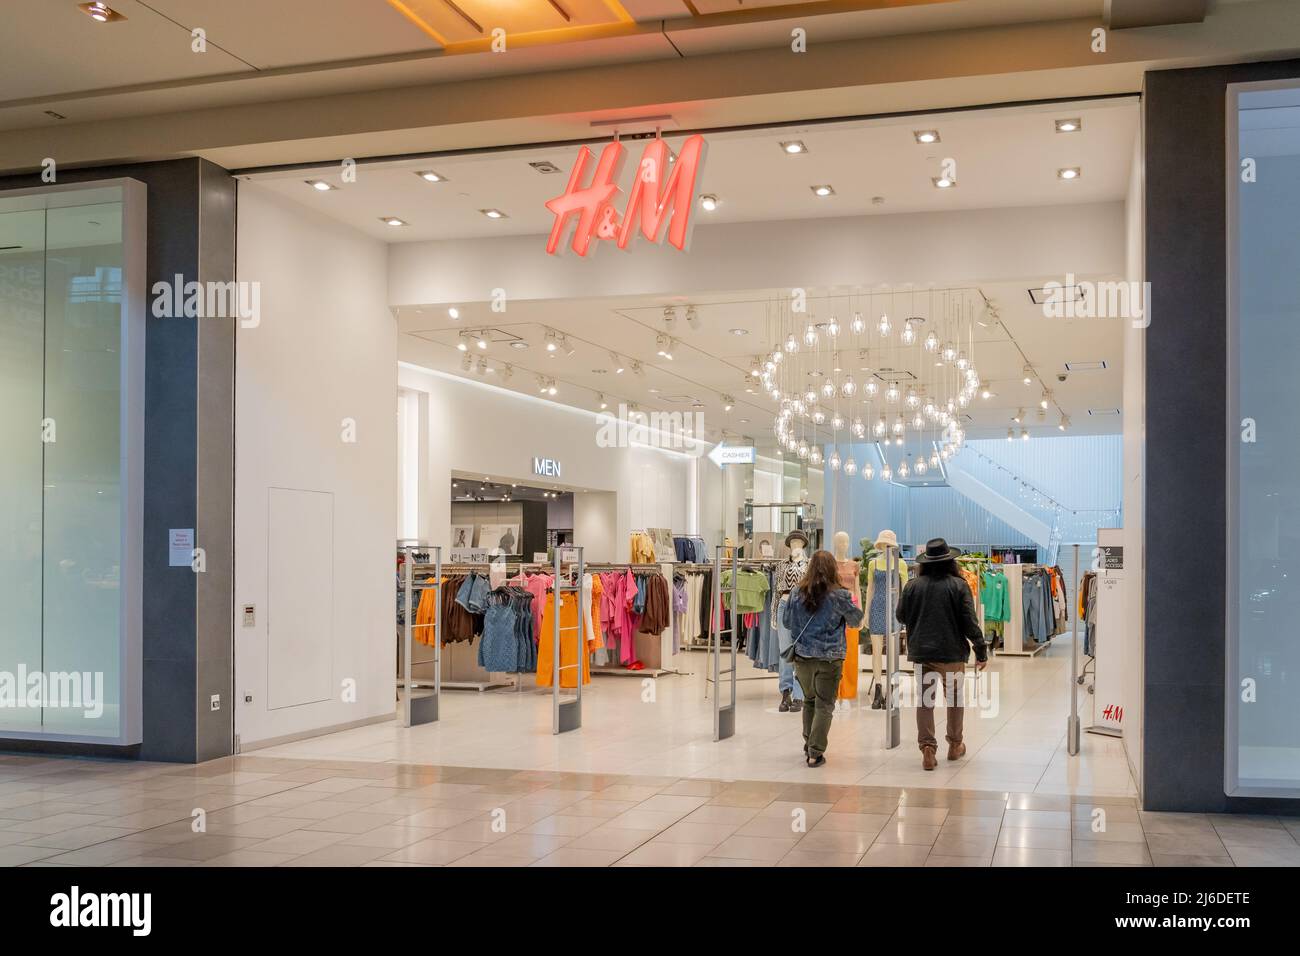 Houston, Texas, USA - February 25, 2022: H M store in a shopping mall. H M  Hennes and Mauritz AB (H M) is a Swedish multinational clothing company  Stock Photo - Alamy